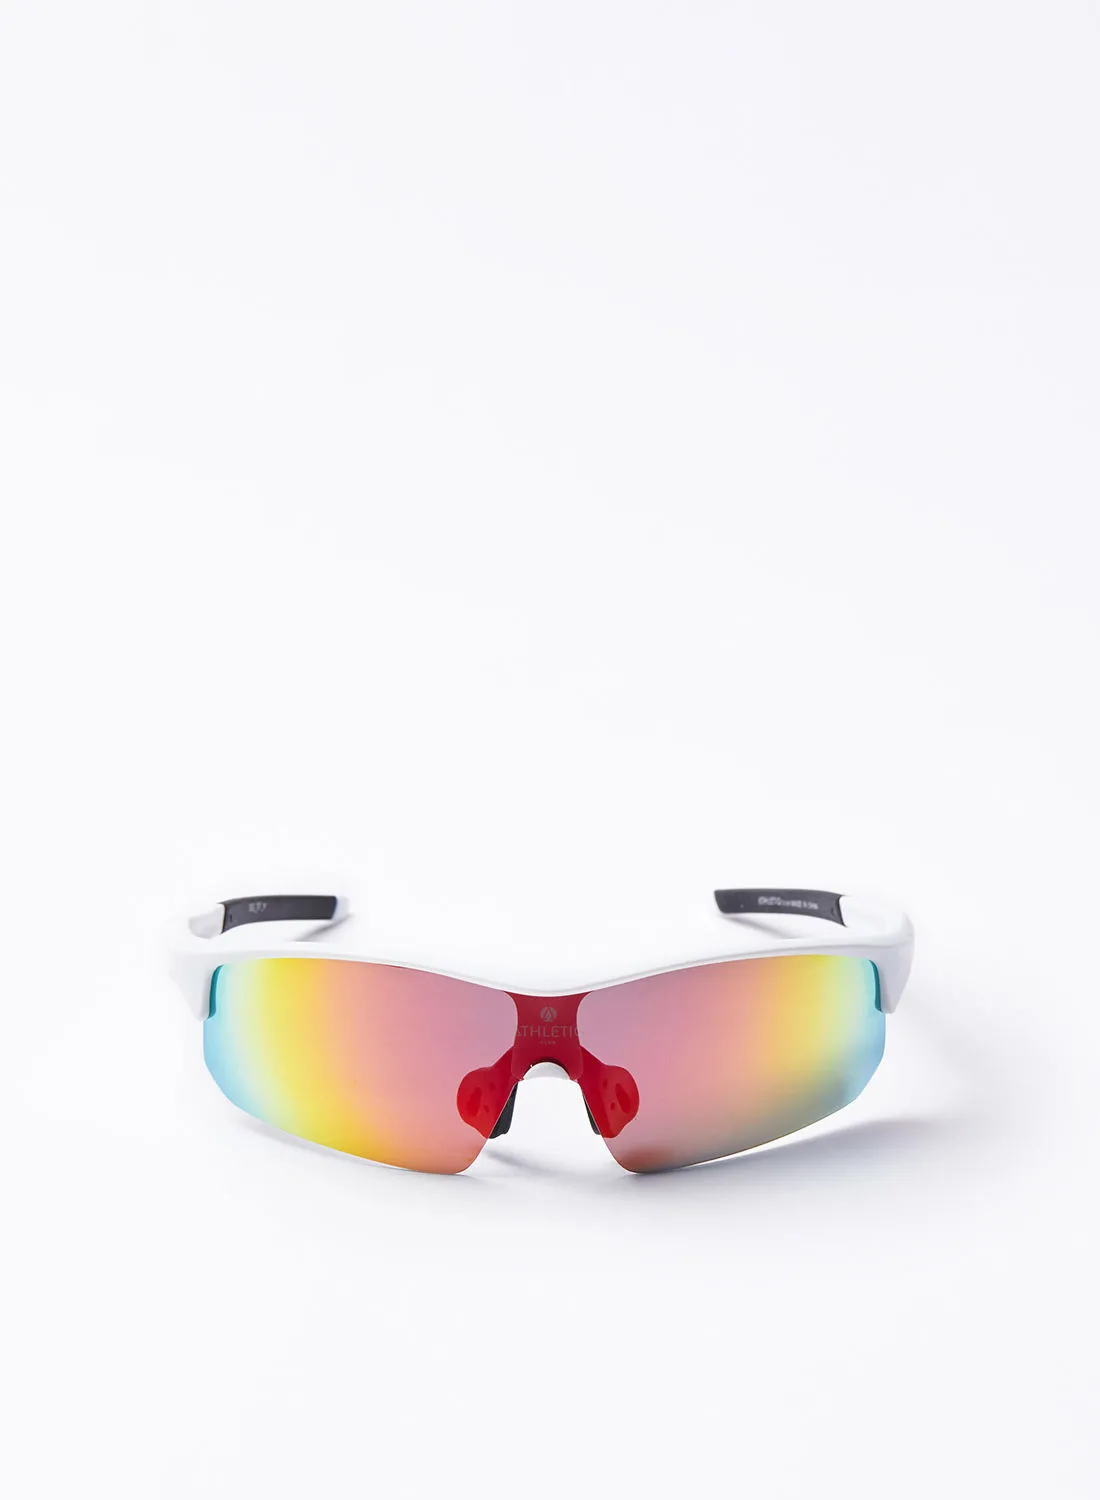 Athletiq Cycling Scooter Sunglasses - Athletiq Club Oryx - White Frame With Red Fire Multilayer Mirror Lens